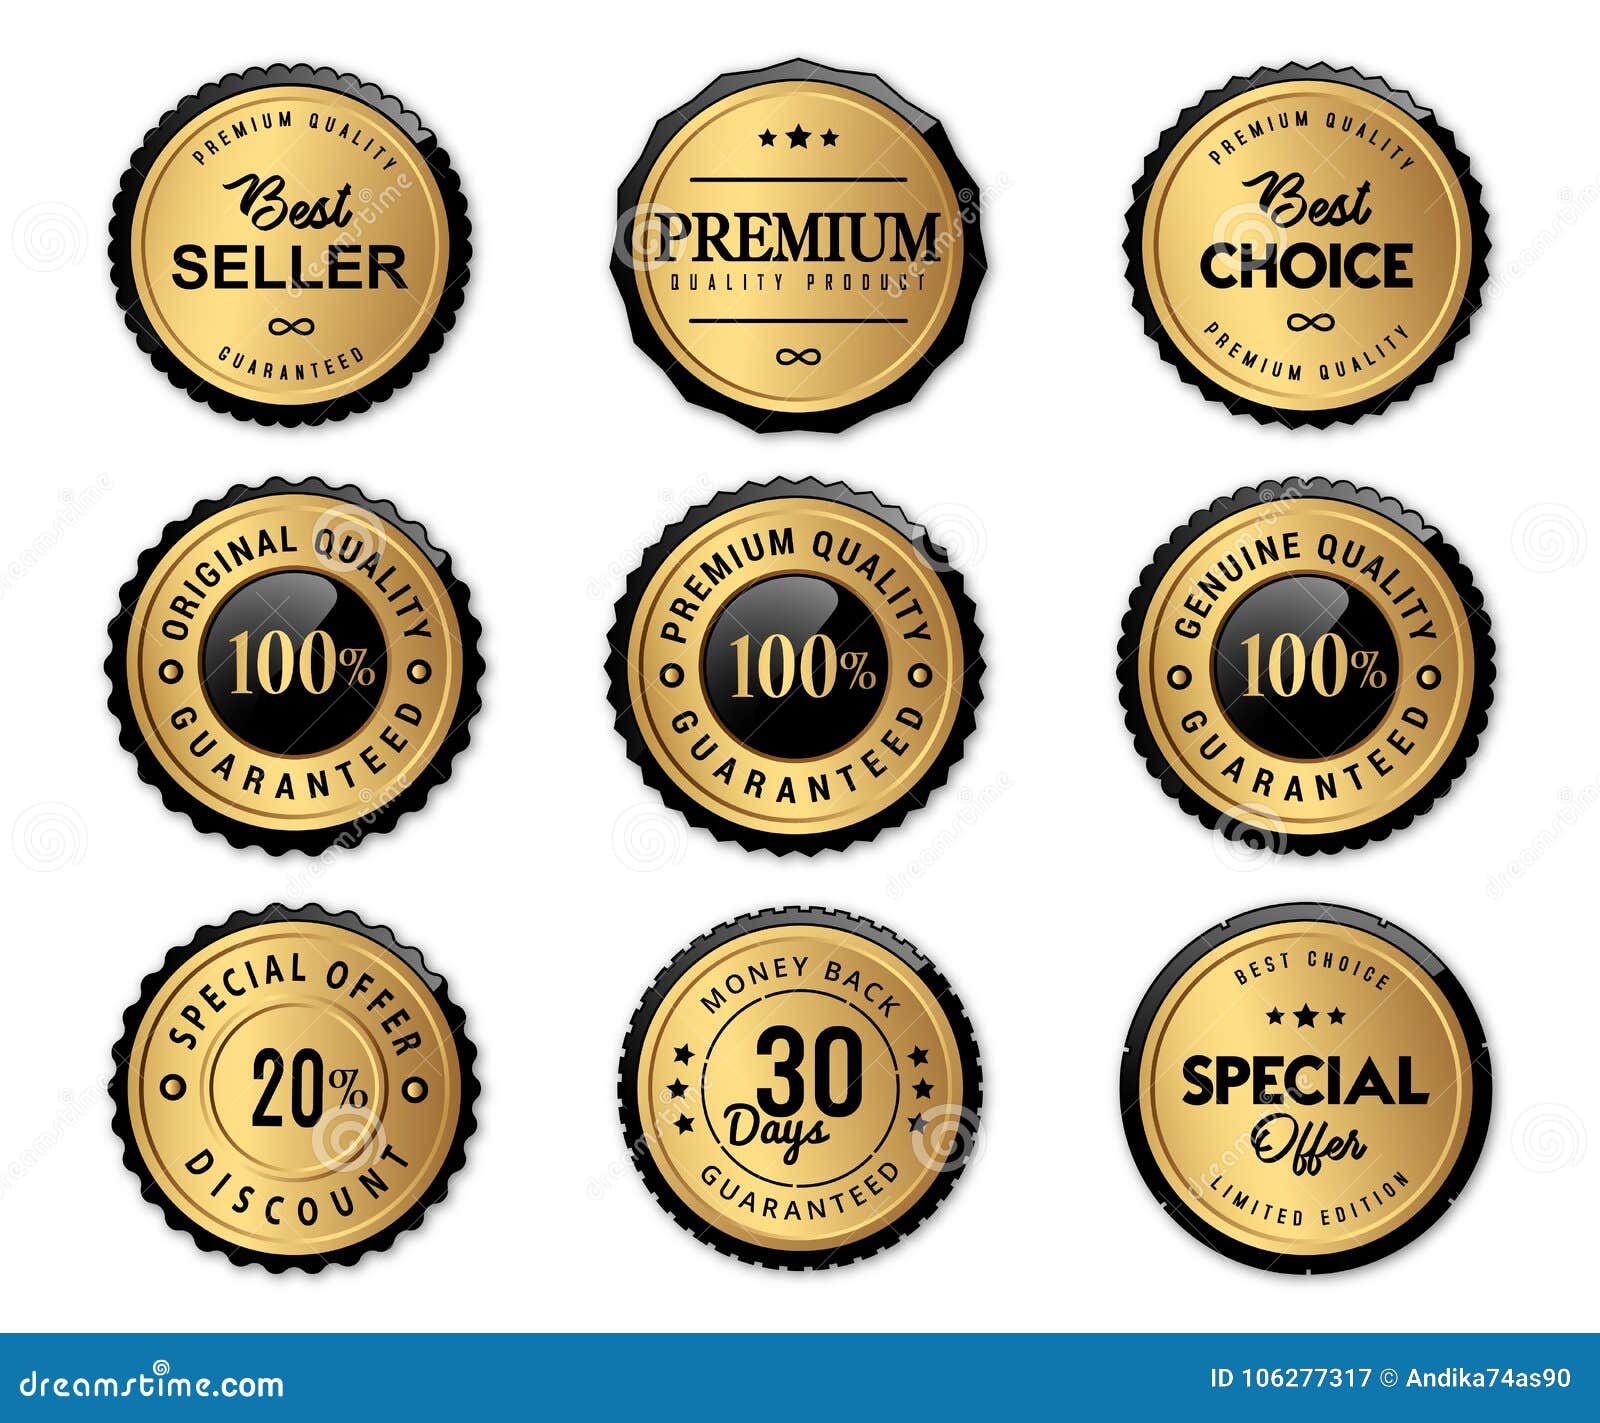 luxury seal labels gold and premium quality product